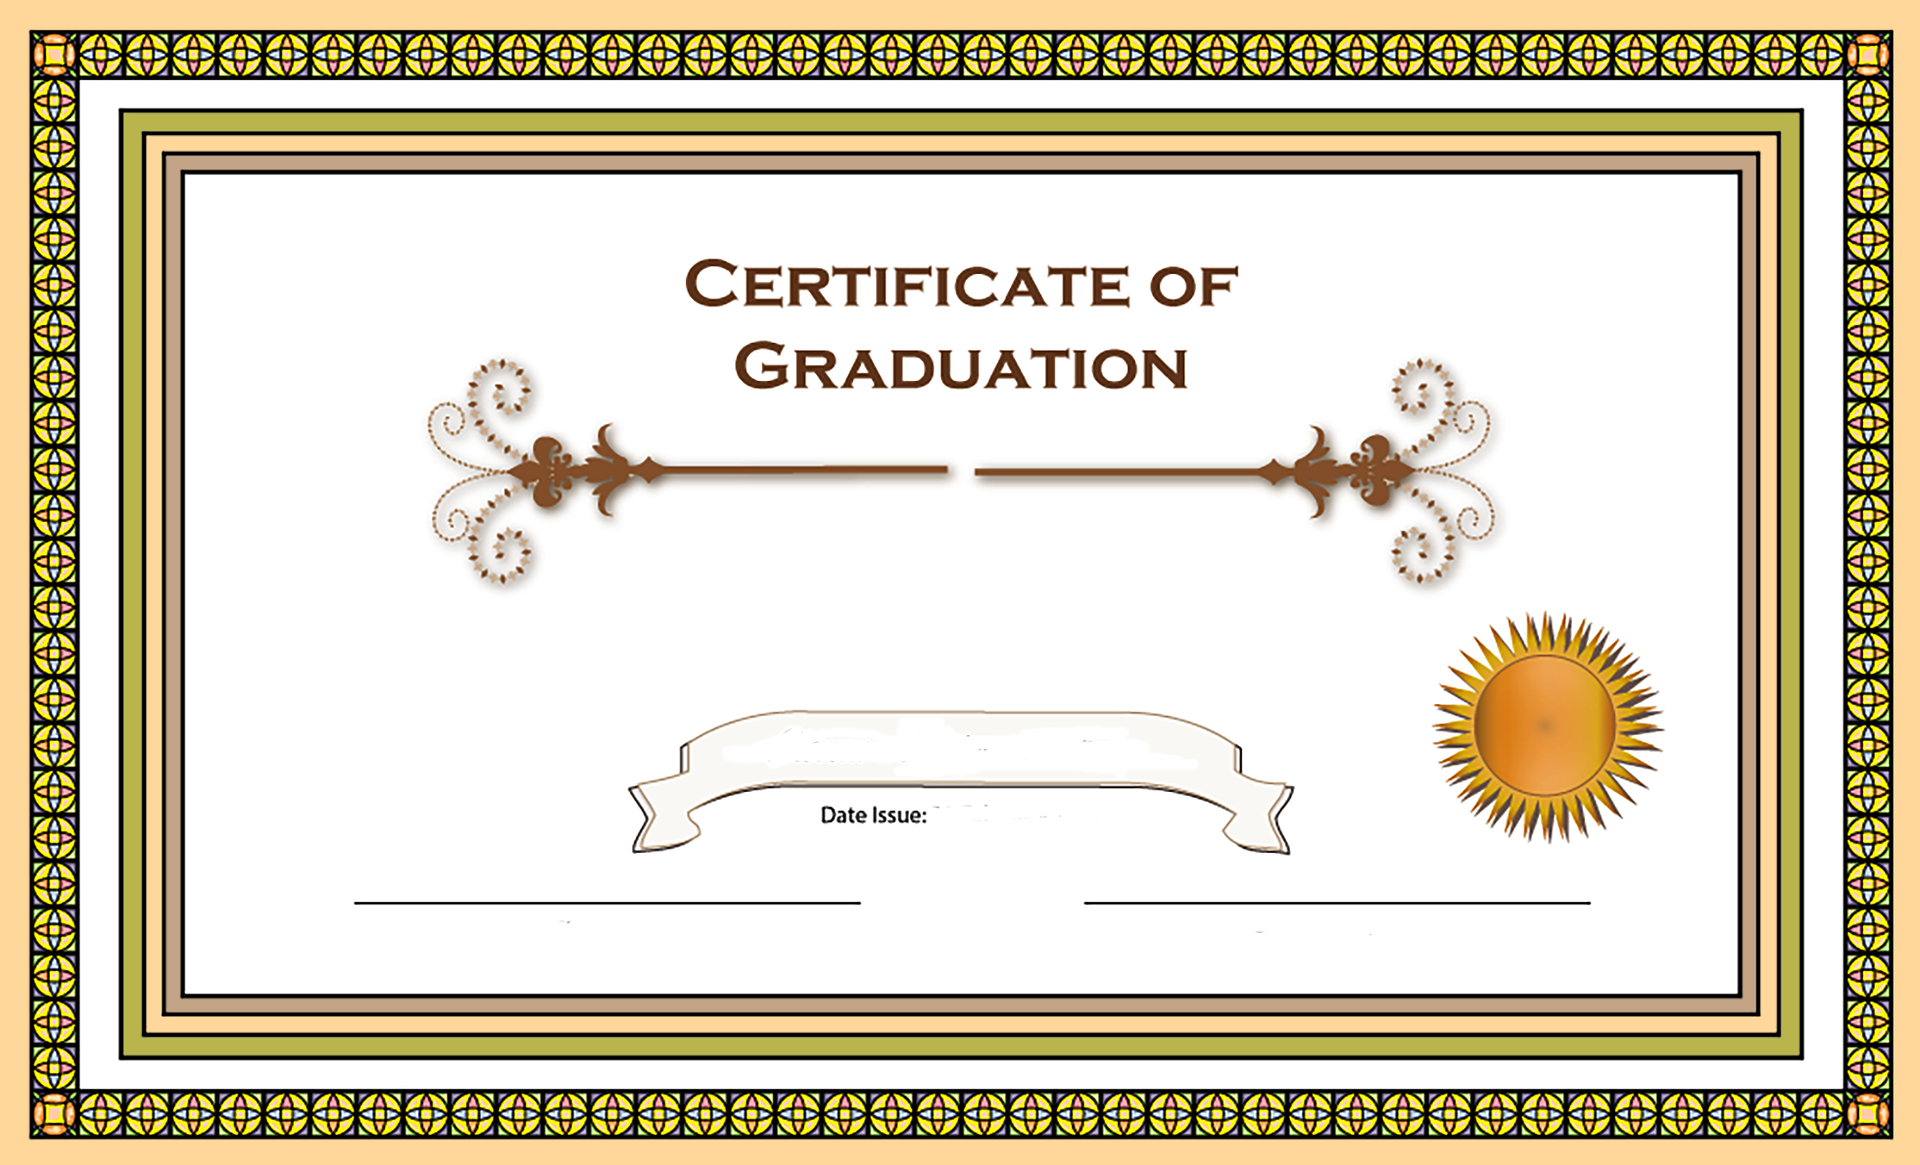 certificate-g199492dbe_1920.png